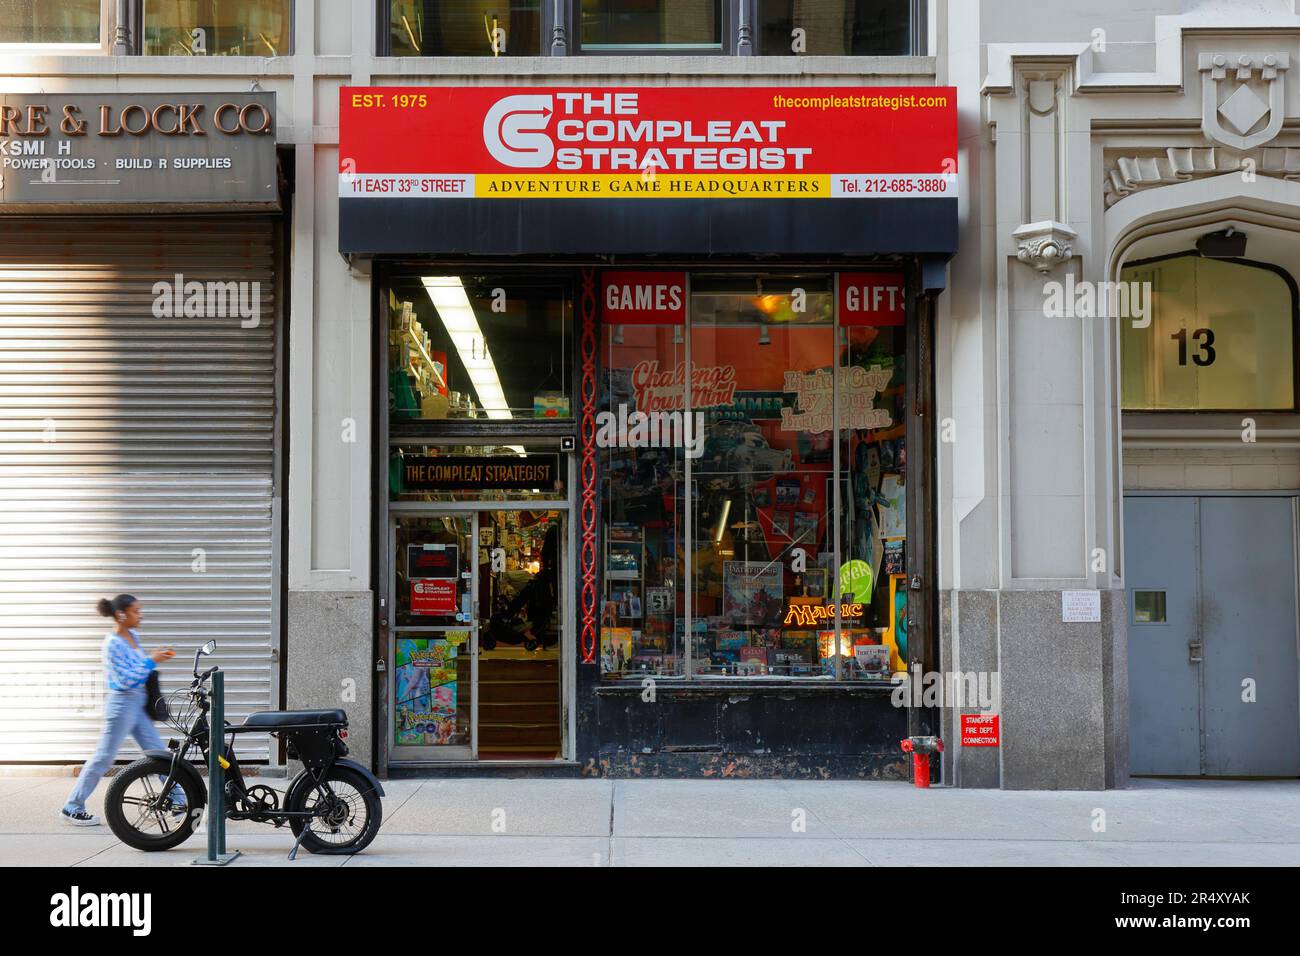 The Compleat Strategist, 11 E 33rd St, New York, NYC storefront photo of a gaming store in Midtown Manhattan. Stock Photo